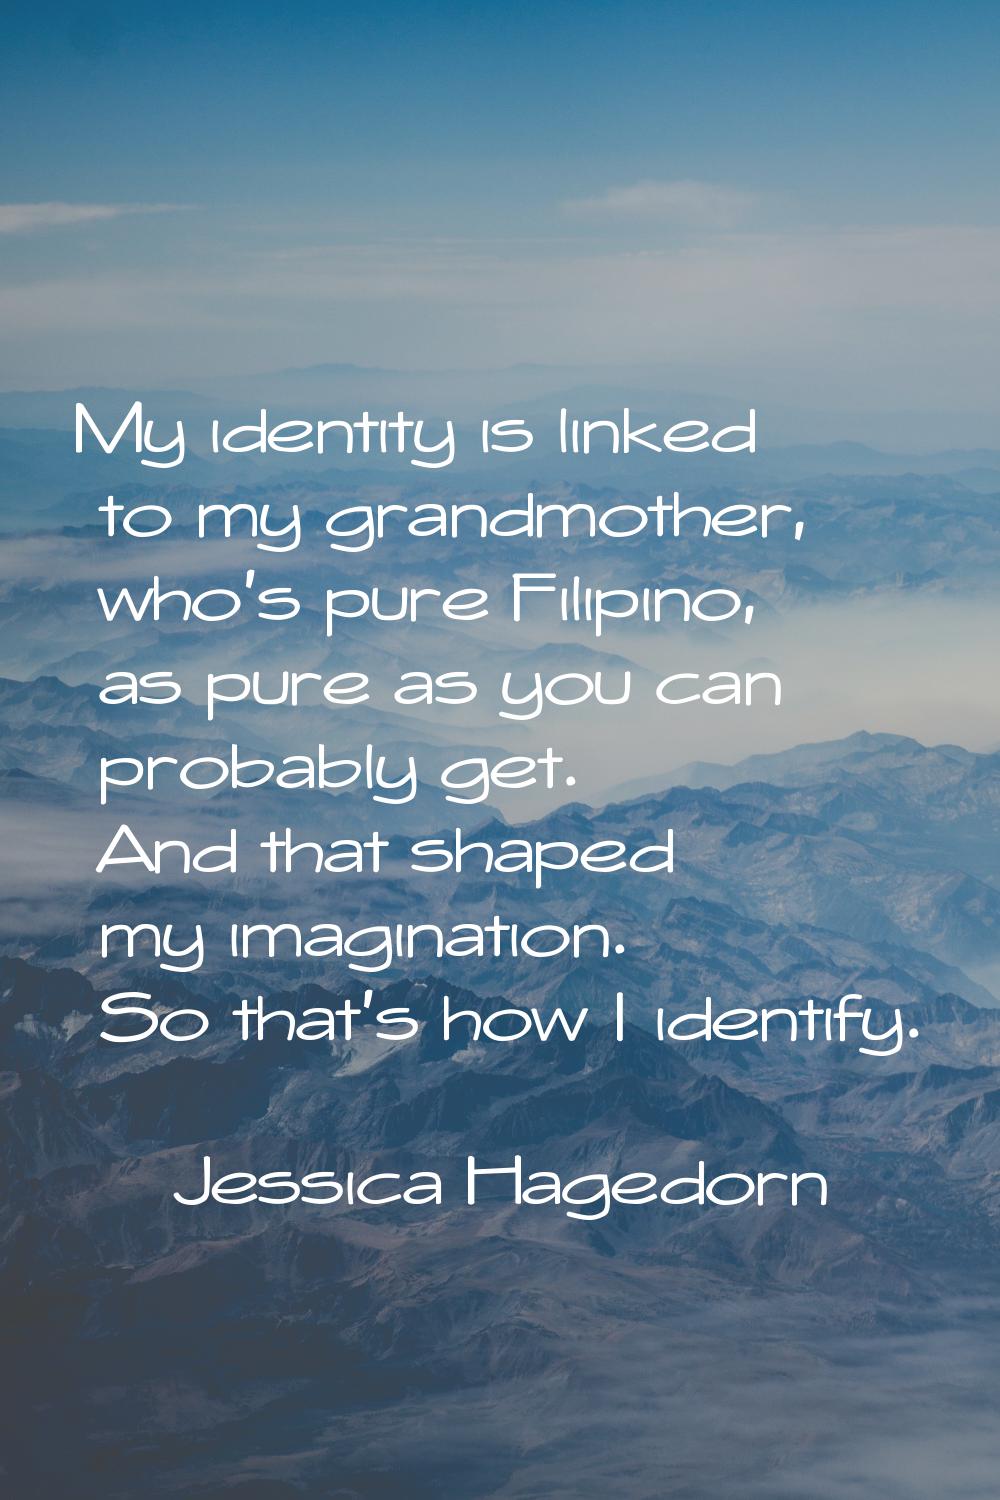 My identity is linked to my grandmother, who's pure Filipino, as pure as you can probably get. And 